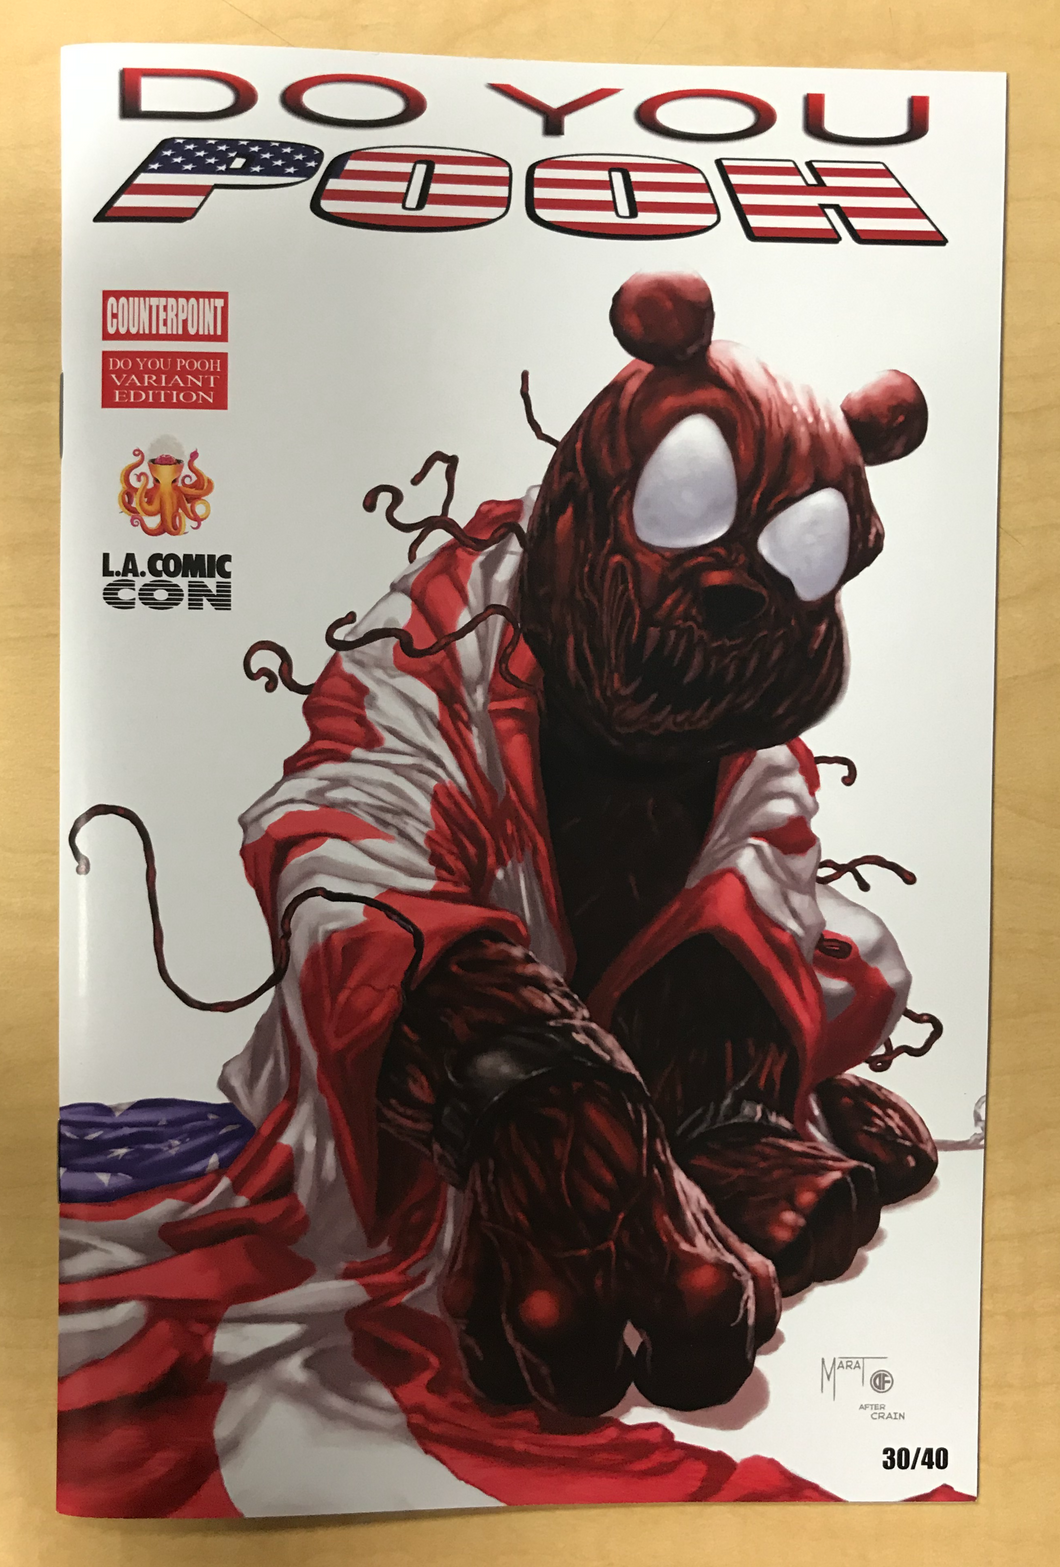 Do You Pooh? #1 Spider-Man Annual #1 Clayton Crain Homage 2019 LACC Exclusive Dress Variant Cover by Marat Mychaels Only 40 Copies Made!!!